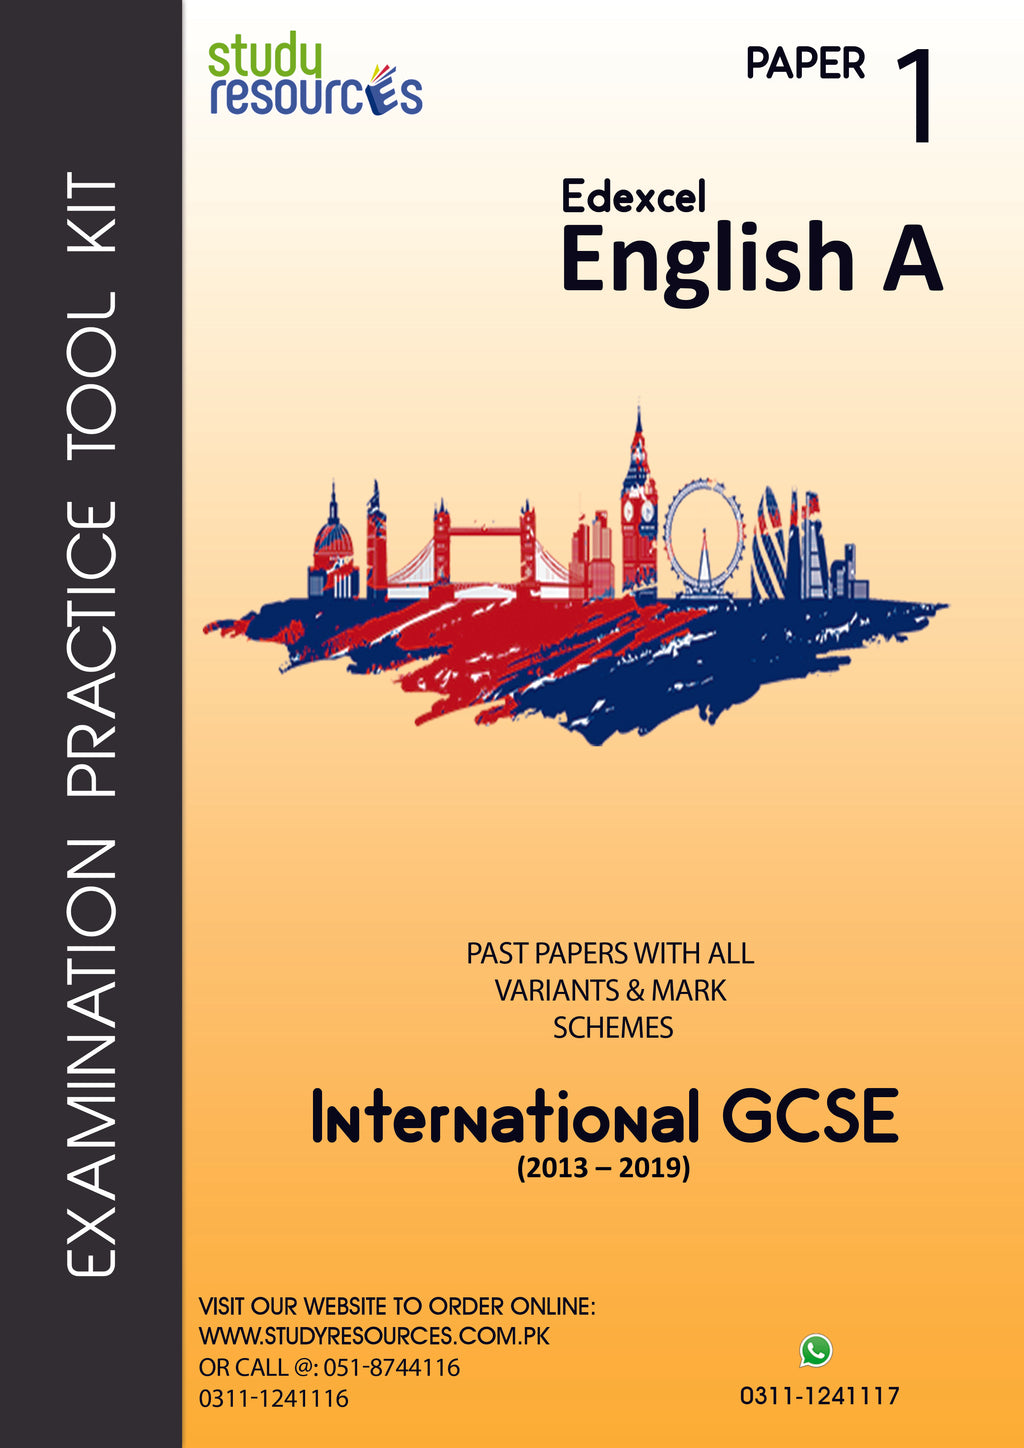 Edexcel IGCSE English "A" Paper-1 Past Papers (2013-2019)